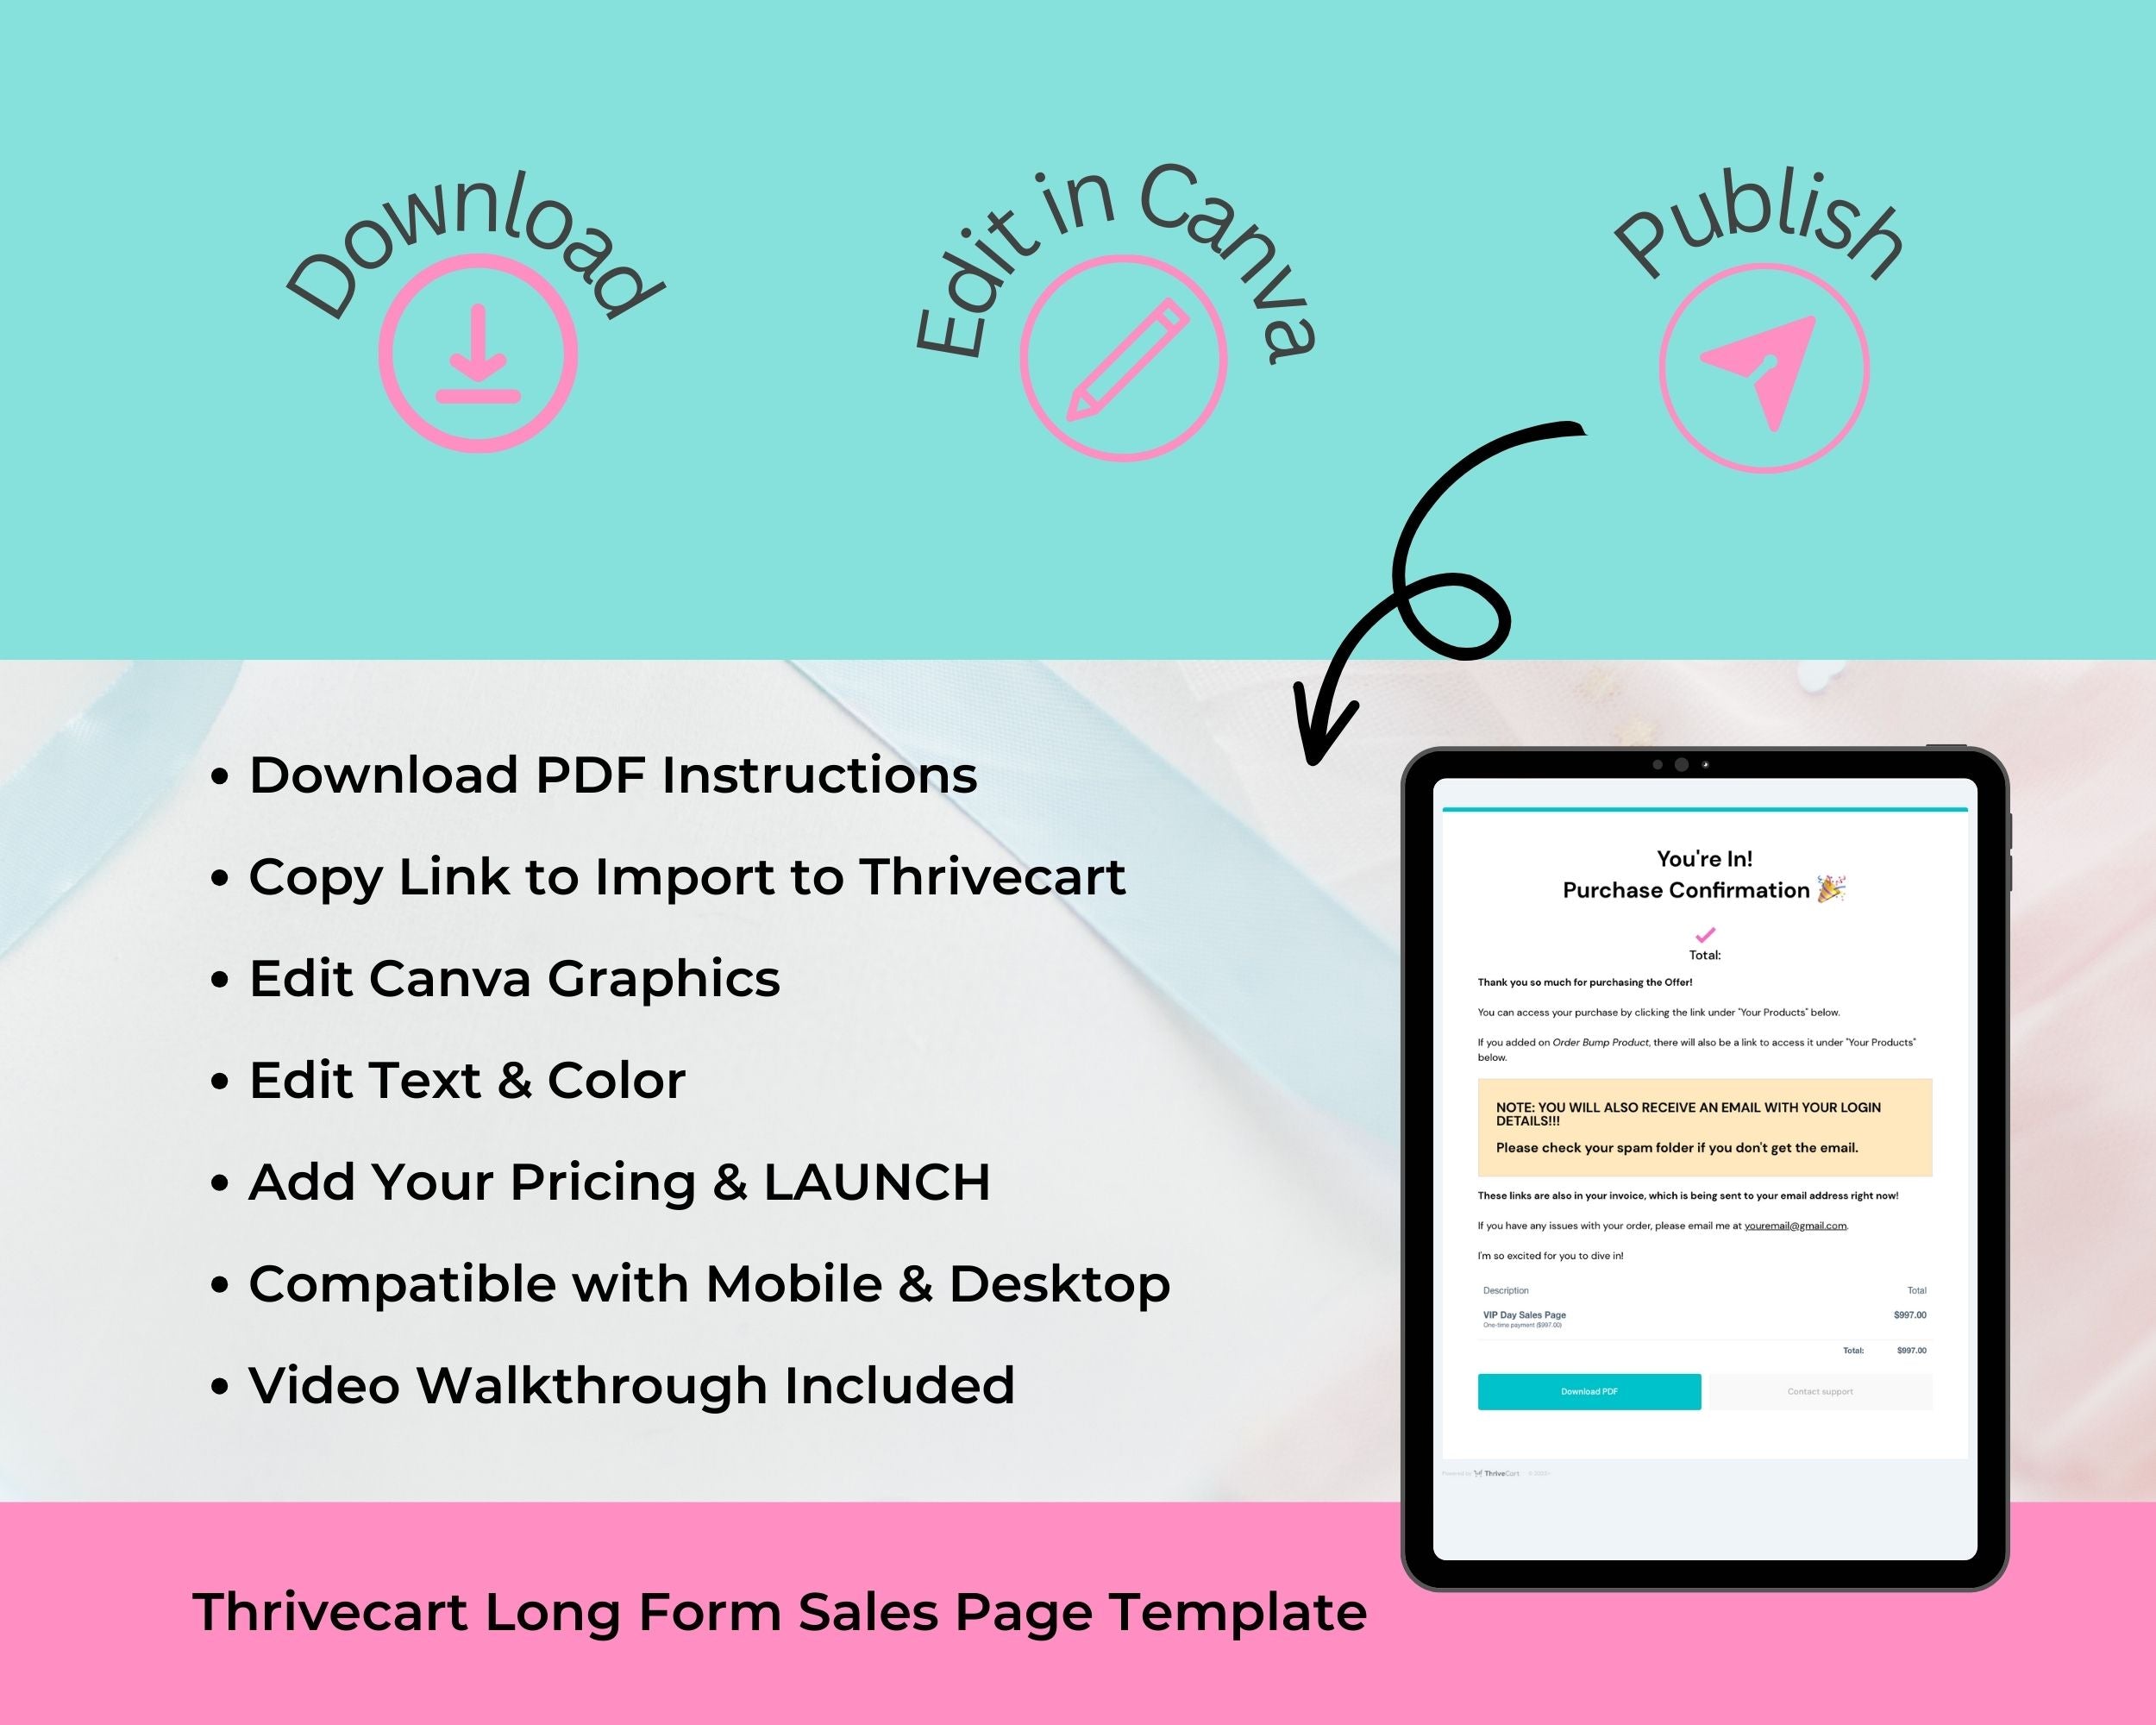 VIP Day Sales Page Template in ThriveCart